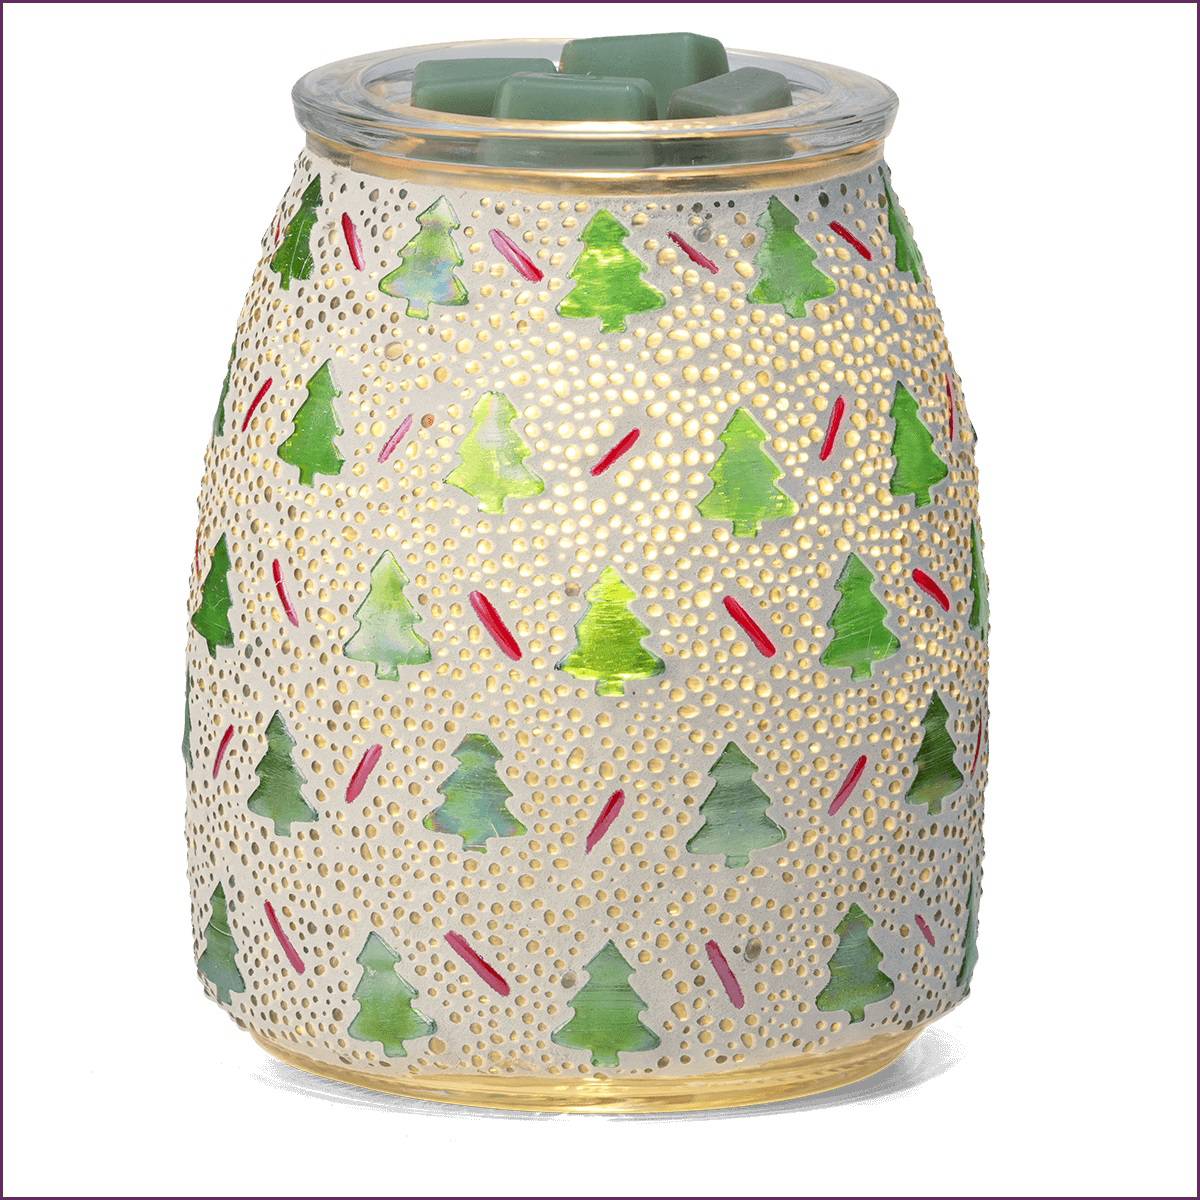 Merry Mosaic Scentsy Warmer | Bars On